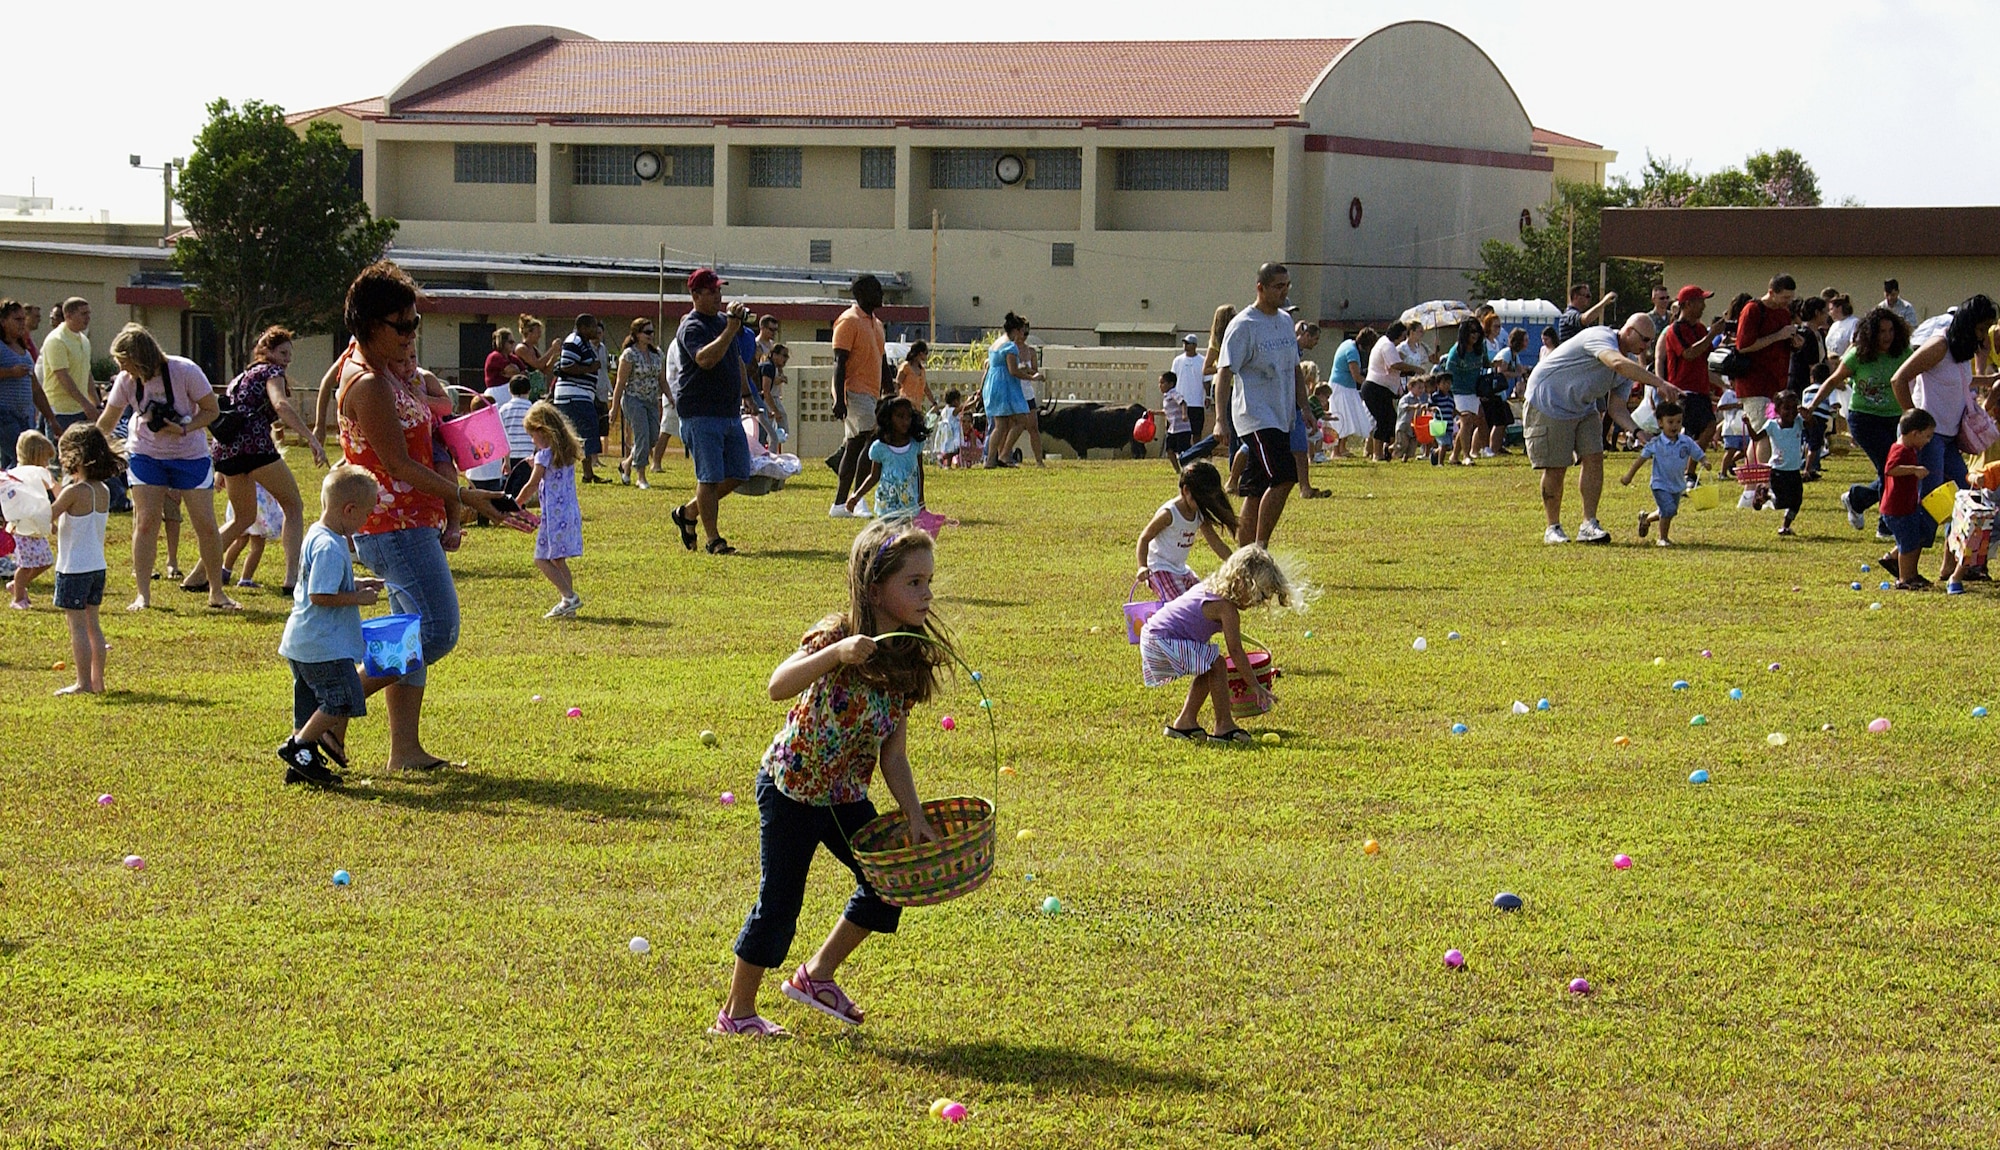 ANDERSEN AIR FORCE BASE, Guam -- Team Andersen children and their parents scurry after Easter eggs during the Easter egg hunt which was part of the Spring Carnival held on youth center grounds April 11. The children and parents gathered more than 3,000 eggs with prizes such as candy inside. (U.S. Air Force photo by Airman Carissa Wolff)                                